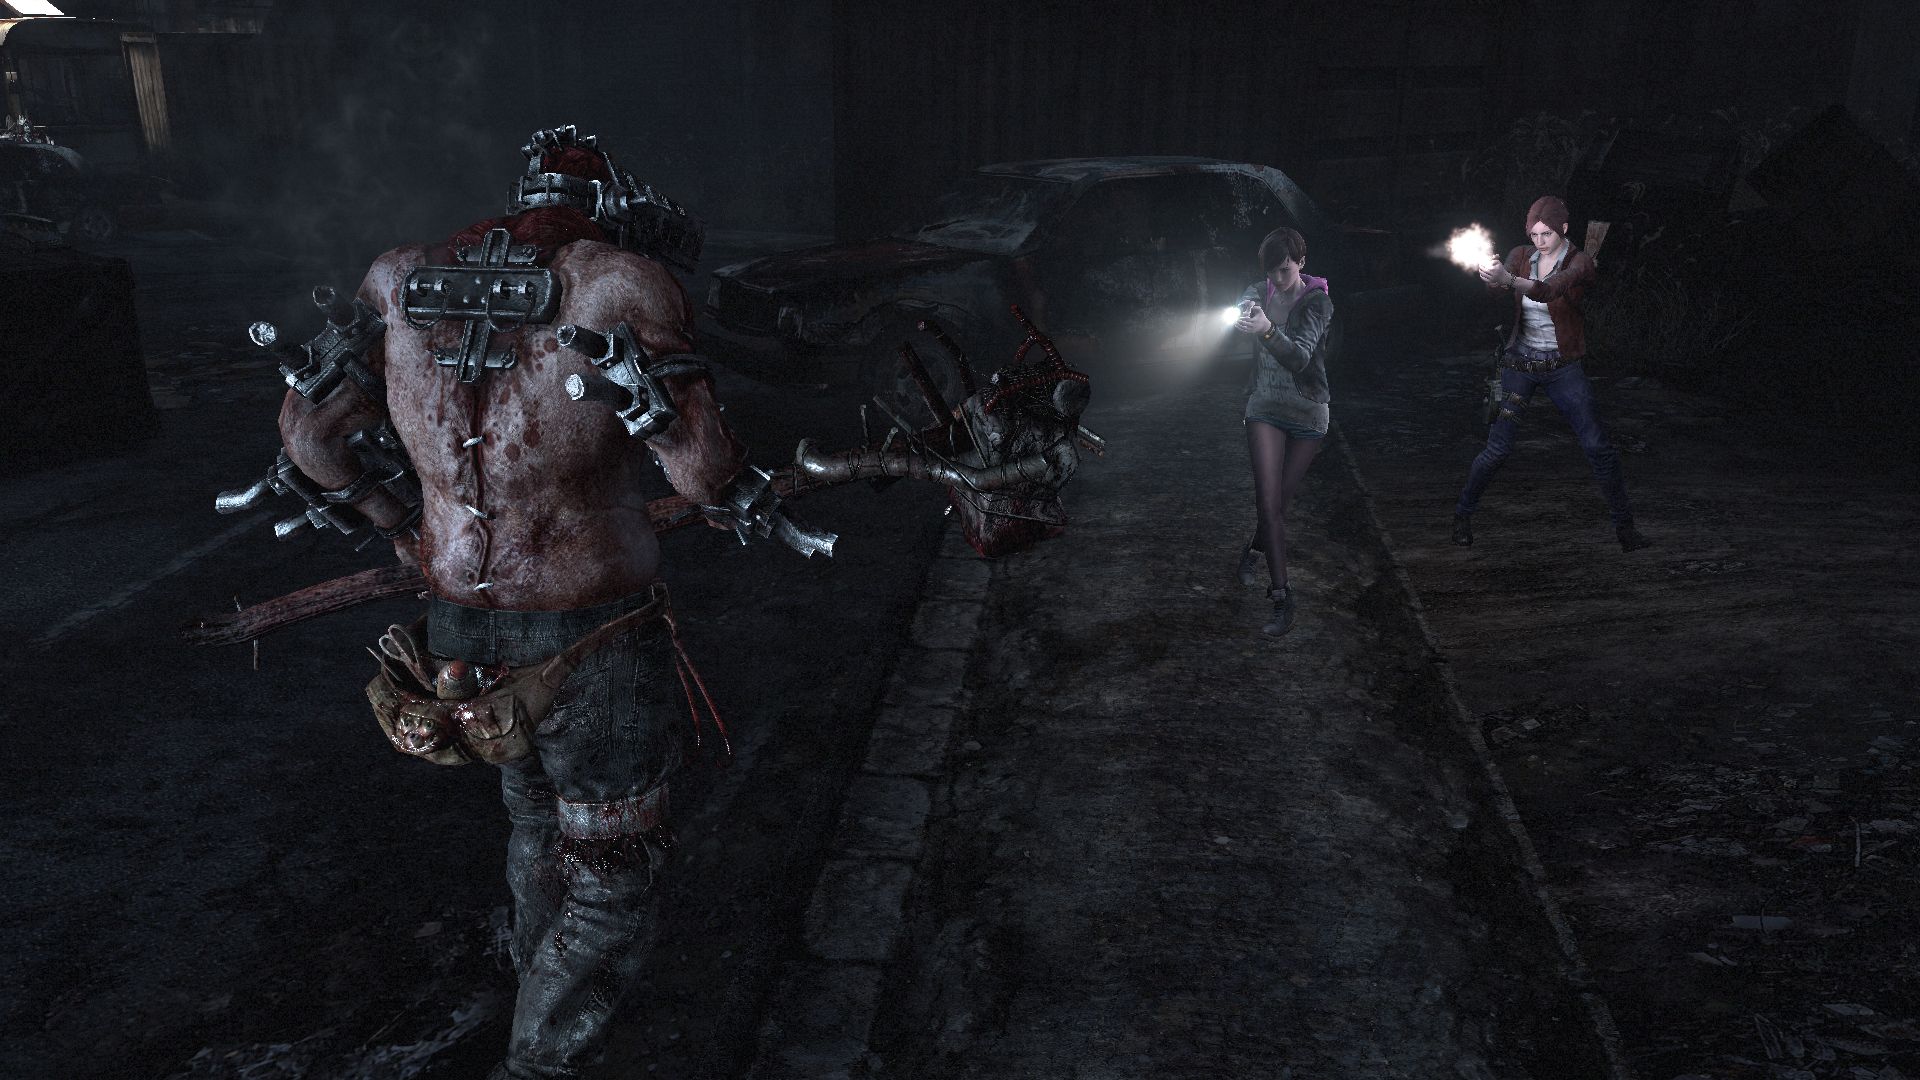 Image for Resident Evil: Revelations 2 Episode 2 available from today